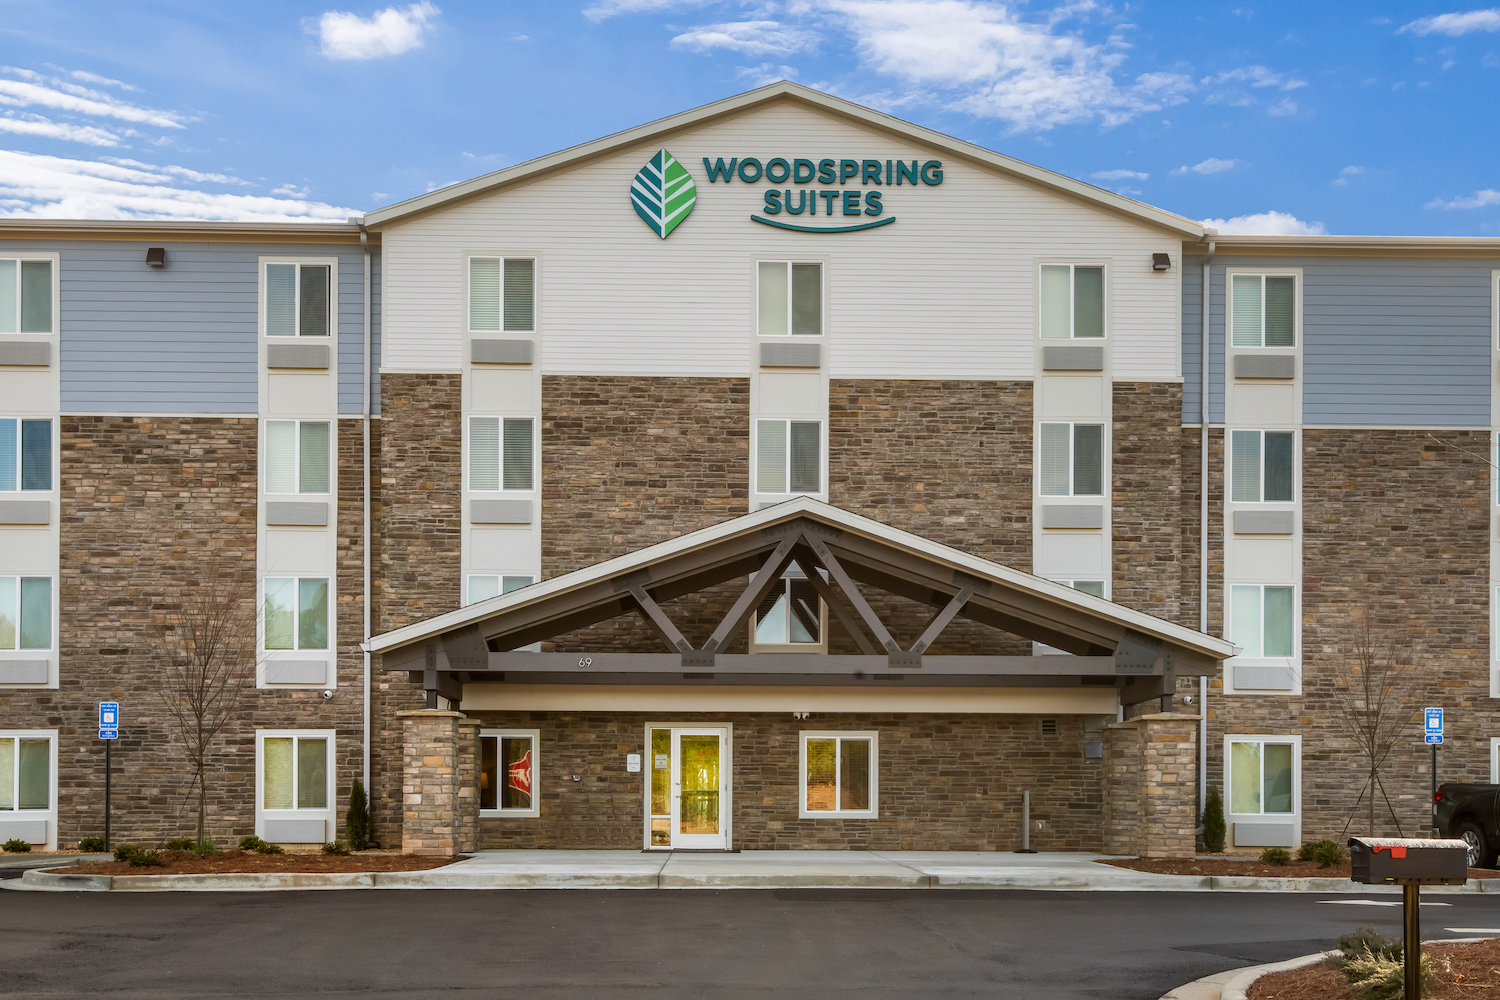 The new WoodSpring Suites Atlanta – Newnan is managed by Sandpiper Hospitality  & owned by Turnstone Group